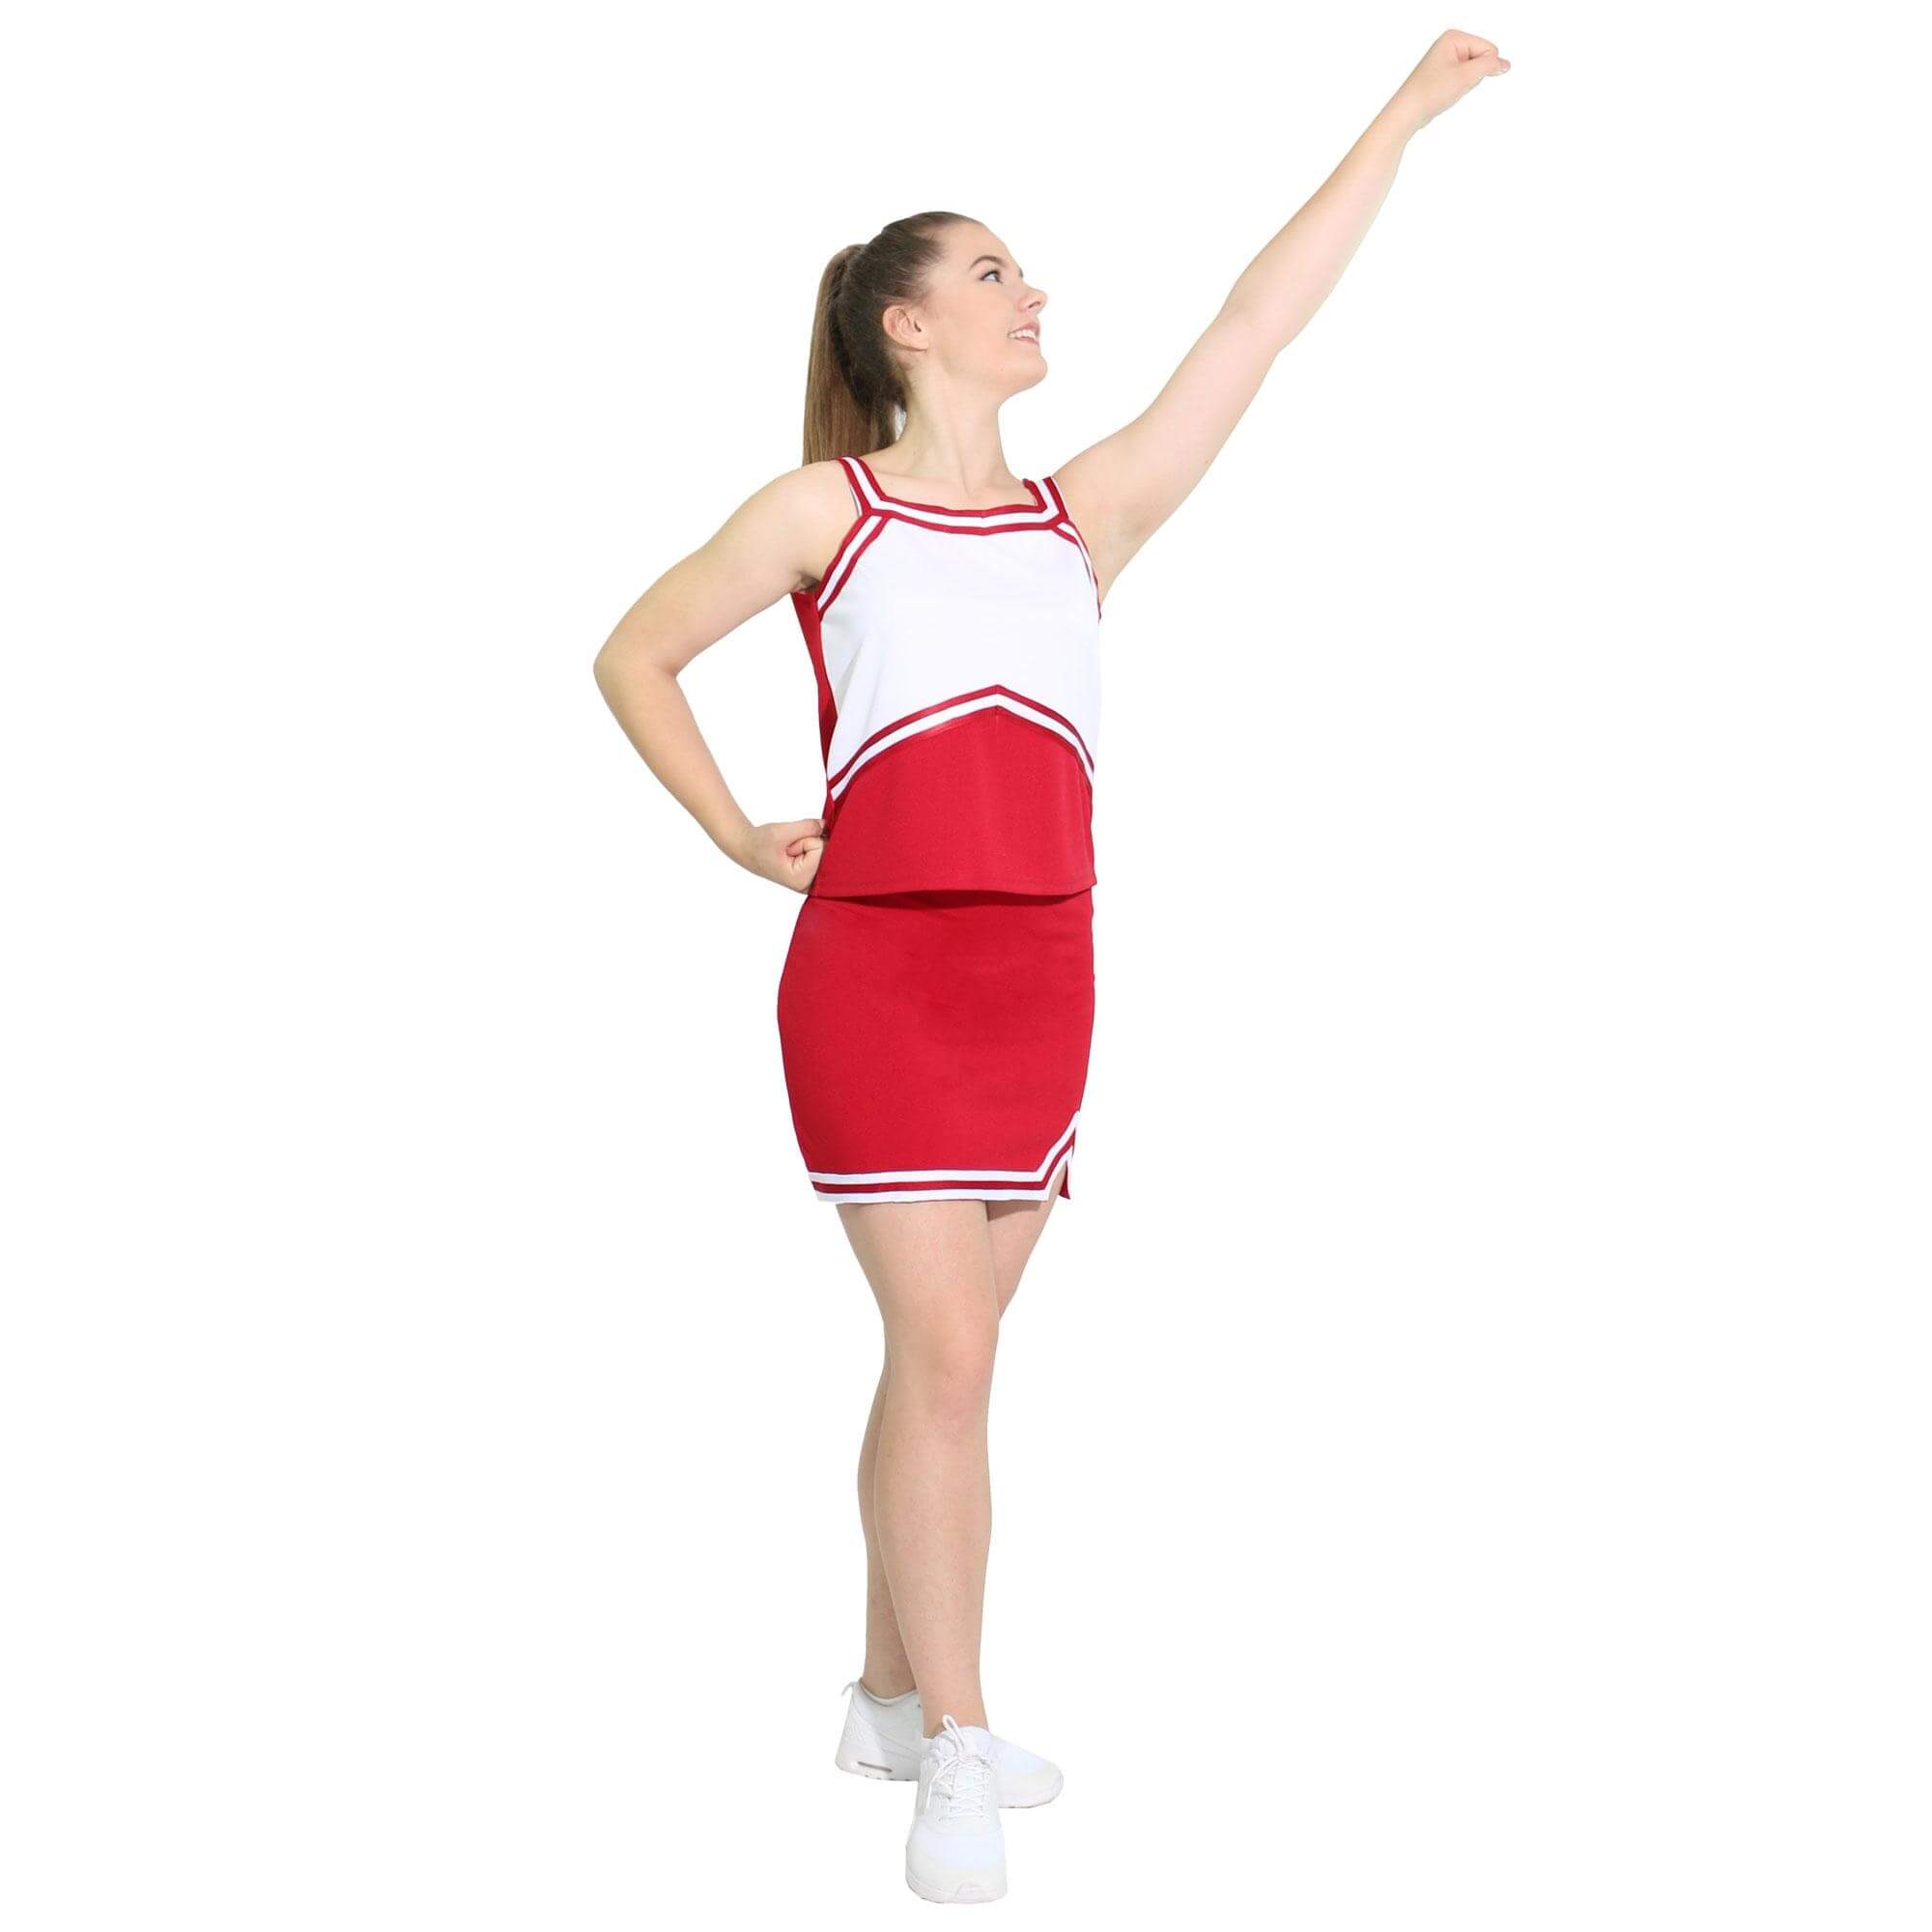 Danzcue Adult Sweetheart Cheerleaders Uniform Shell Top - Click Image to Close